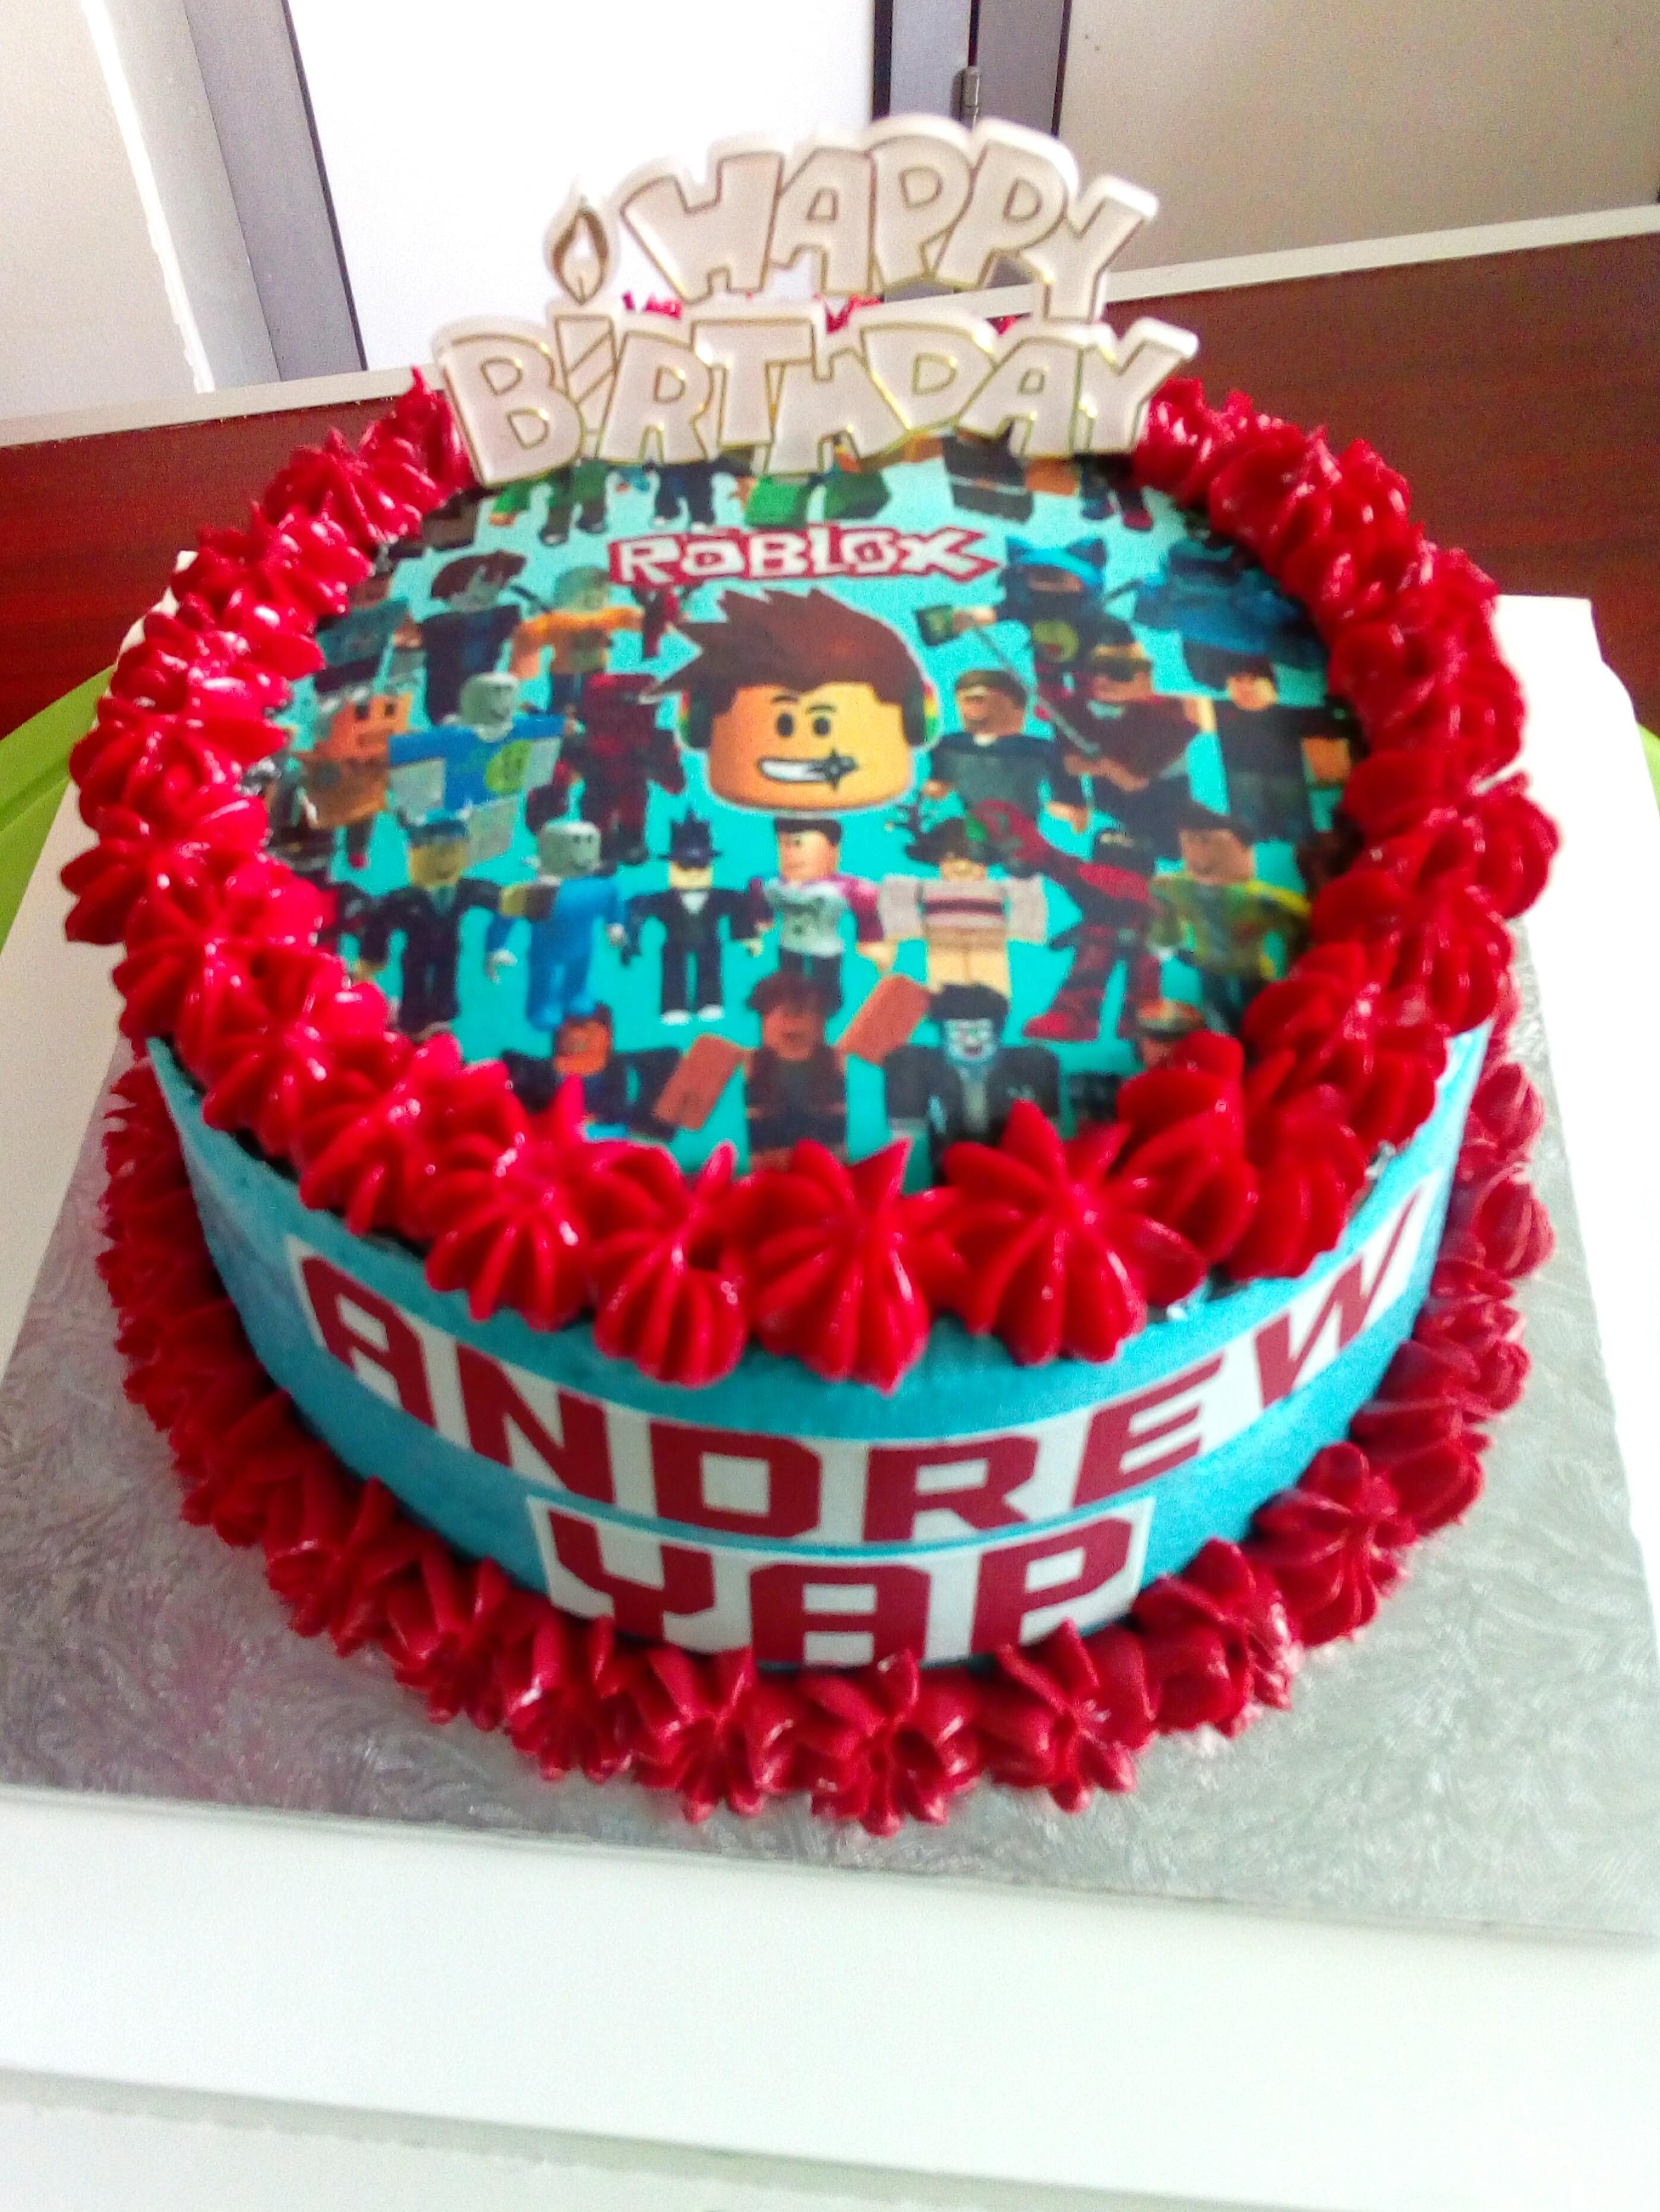 Roblox Cake 5inch Food Drinks Baked Goods On Carousell - roblox cake 5inch food drinks baked goods on carousell